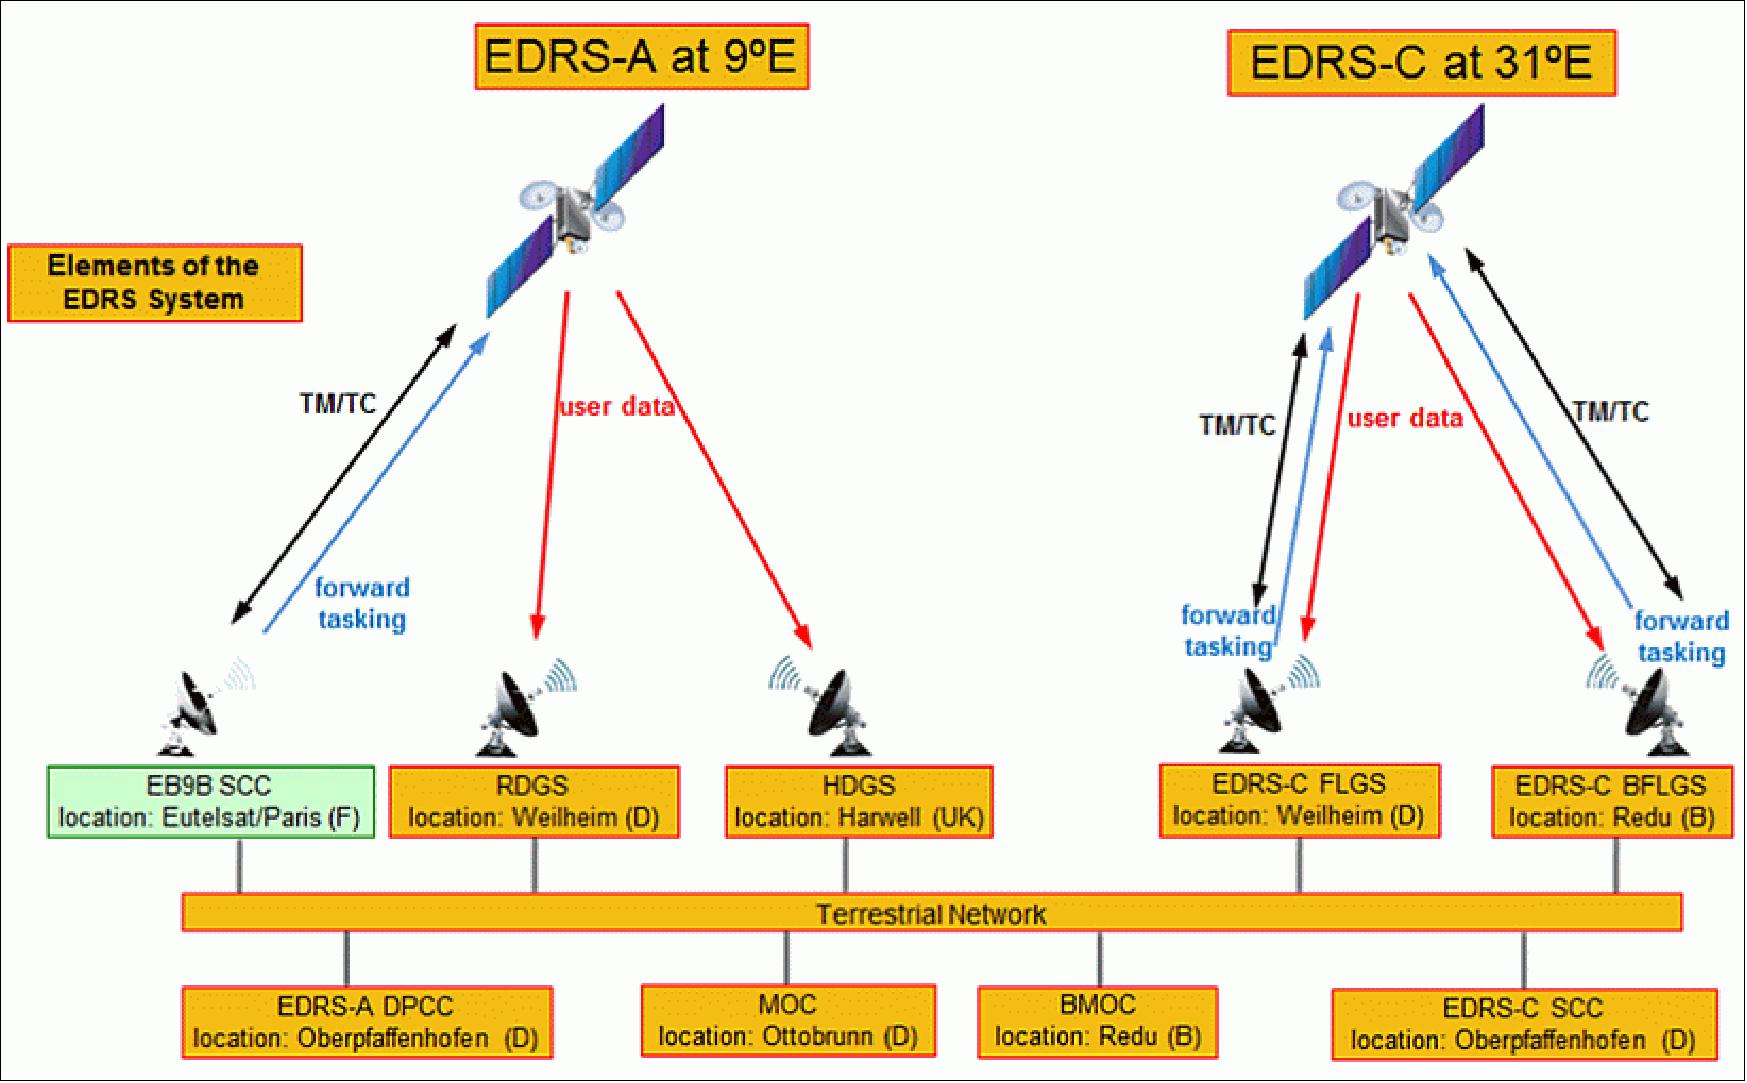 Figure 28: The EDRS system architecture including the various elements of the space and ground segments (image credit: EDRS consortium)